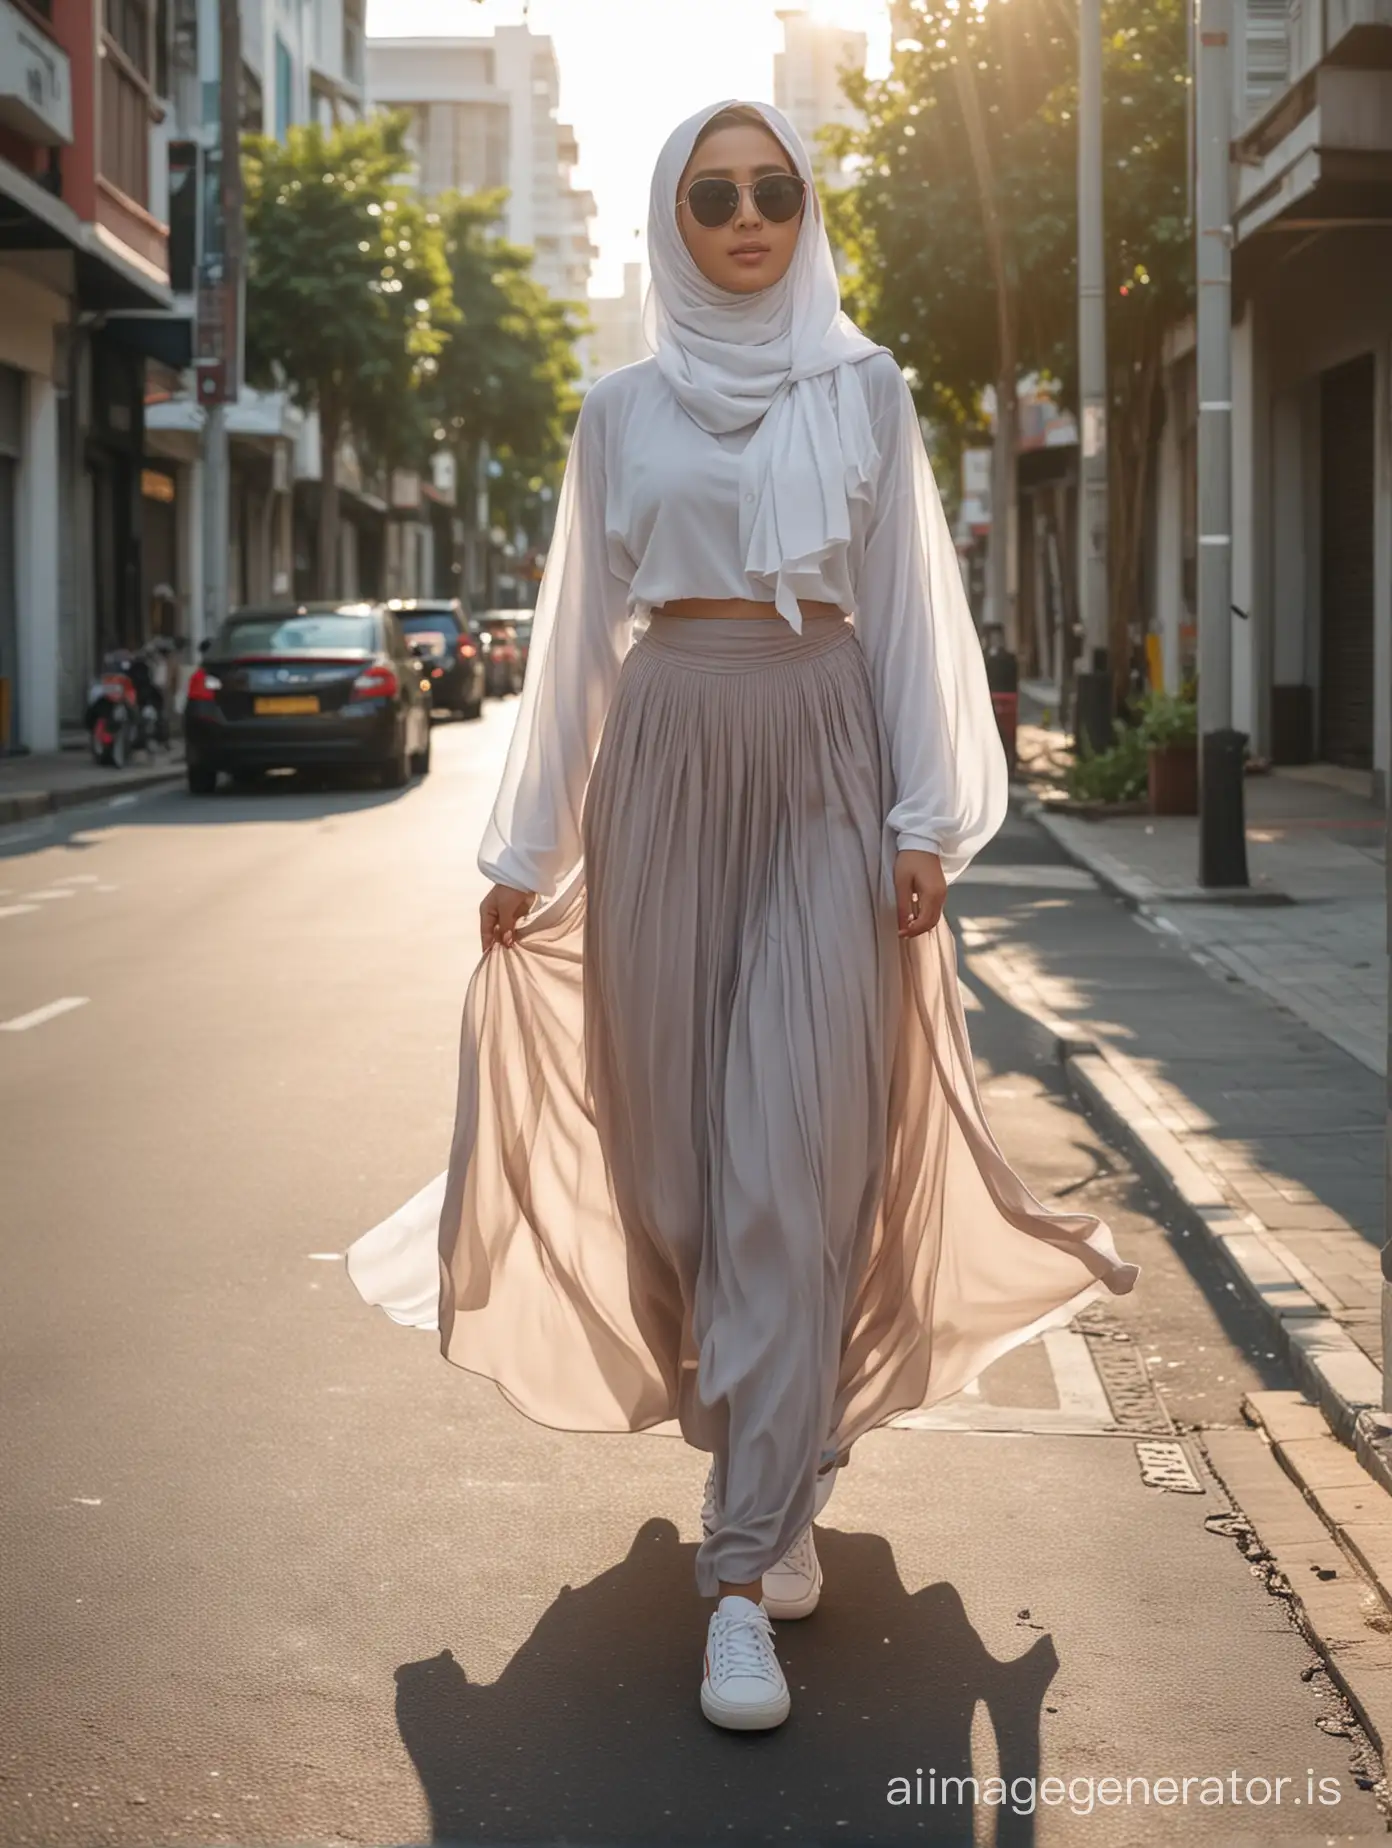 The Malaysian Girl is draped in flowing, long skirt, sneakers, plain patterned long hijab, low angle, innocent face, sun glasses, on the street, walking pose, cinematic lighting,